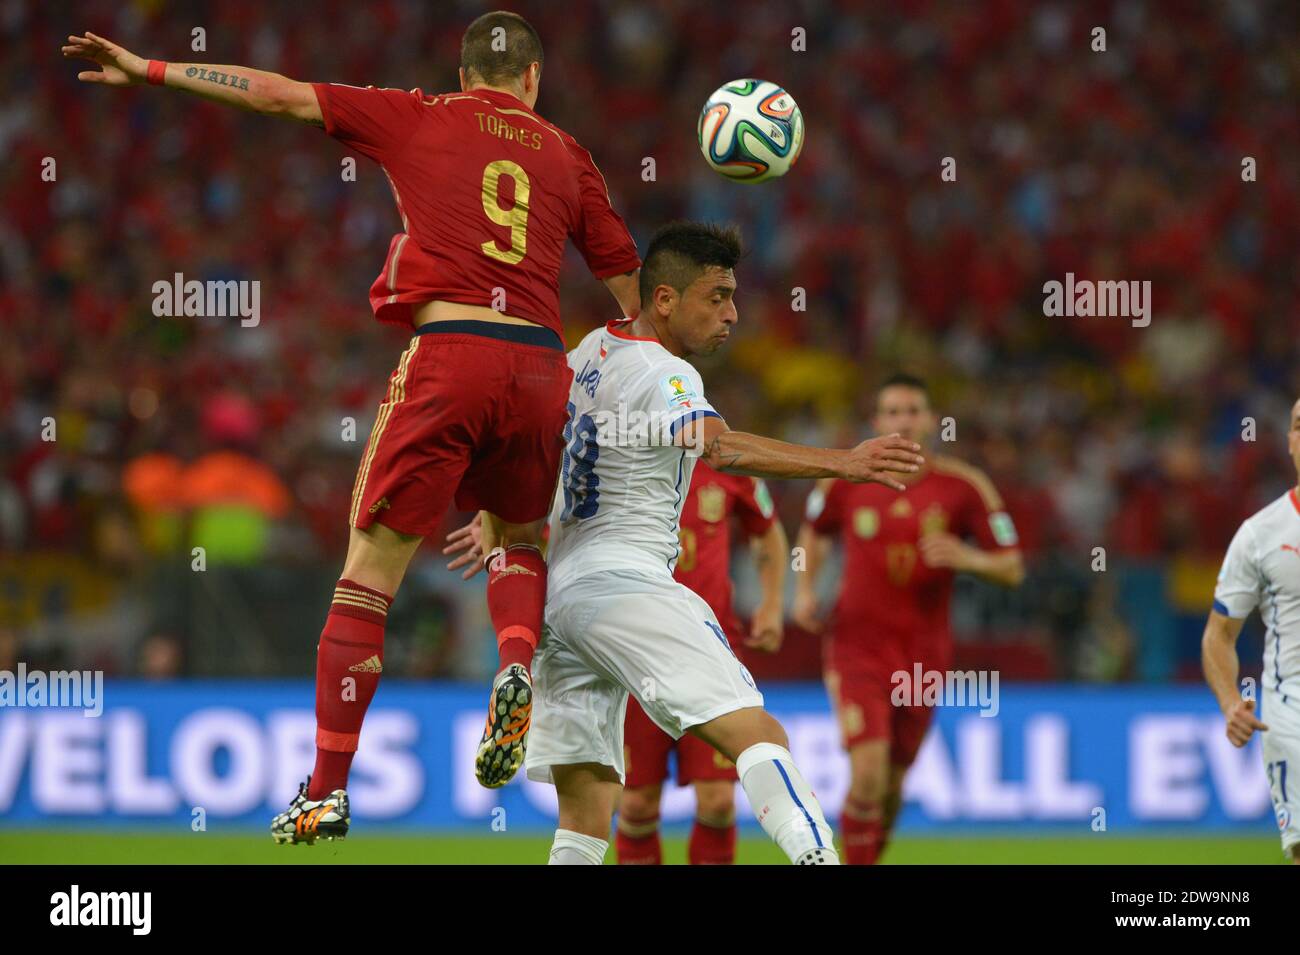 Spain's Fernando Torres battling Chile's Gonzalo Jara during Soccer World Cup 2014 First round Group B match Spain v Chile at Maracana Stadium, Rio de Janeiro, Brazil , on June 18, 2014. Chile won 2-0 and ousted the defending champions from the competition. Photo by Henri Szwarc/ABACAPRESS.COM Stock Photo